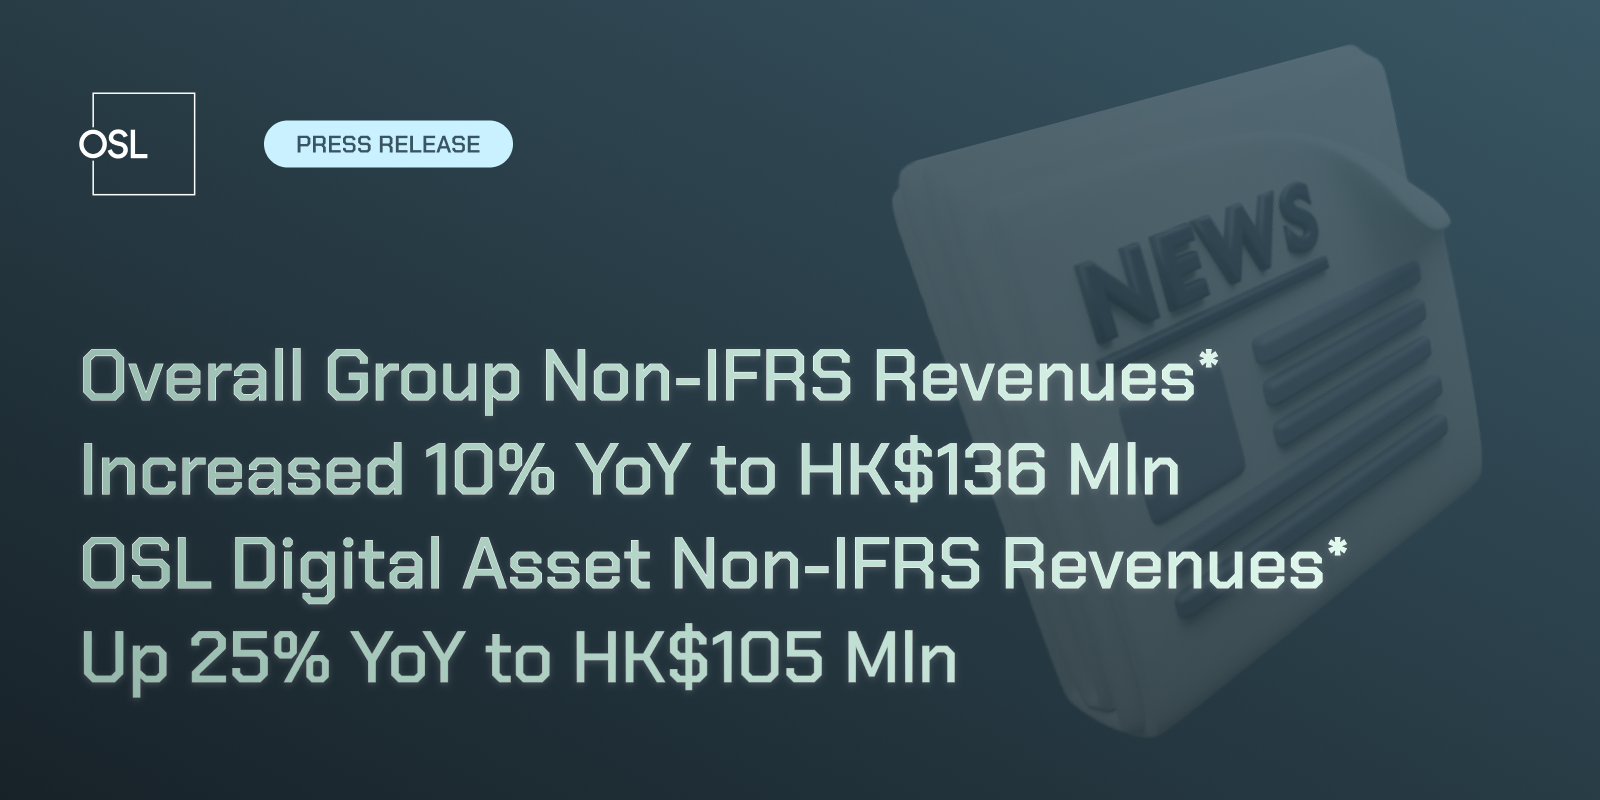 Overall Group Non-IFRS Revenues* Increased 10% YoY to HK$136 Mln  OSL Digital Asset Non-IFRS Revenues* Up 25% YoY to HK$105 Mln